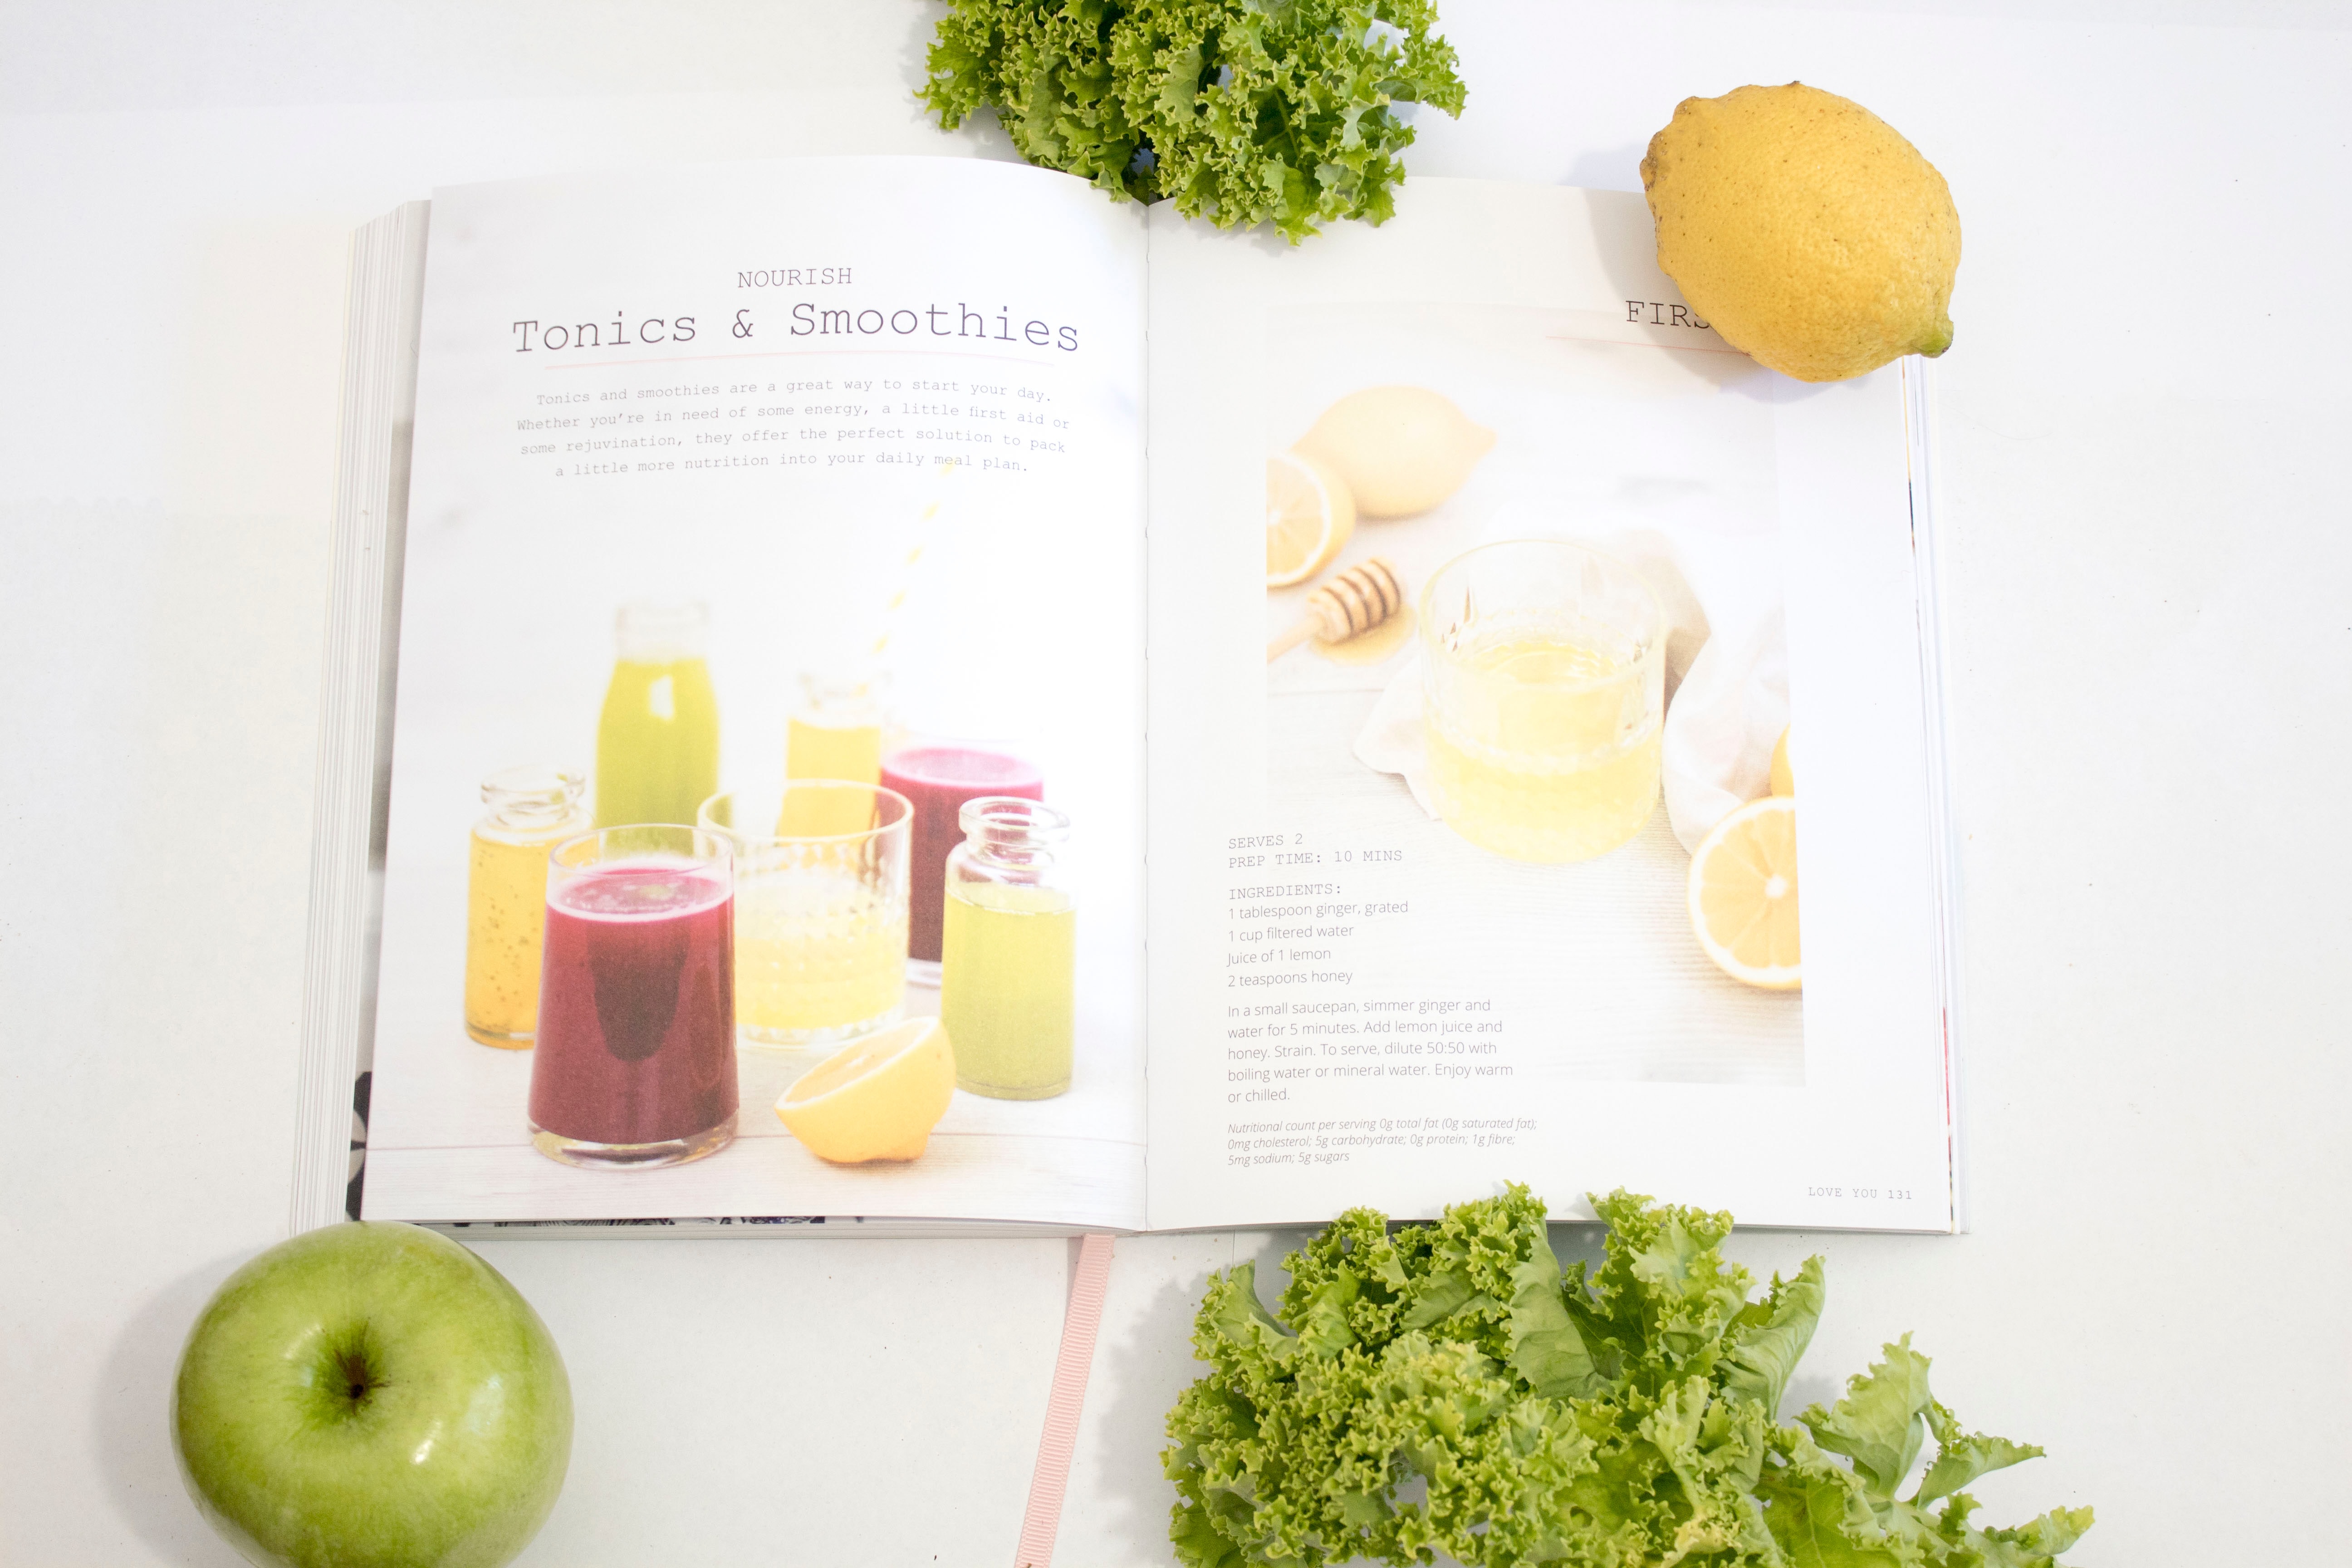 A book lists recipes for tonics & smoothies.